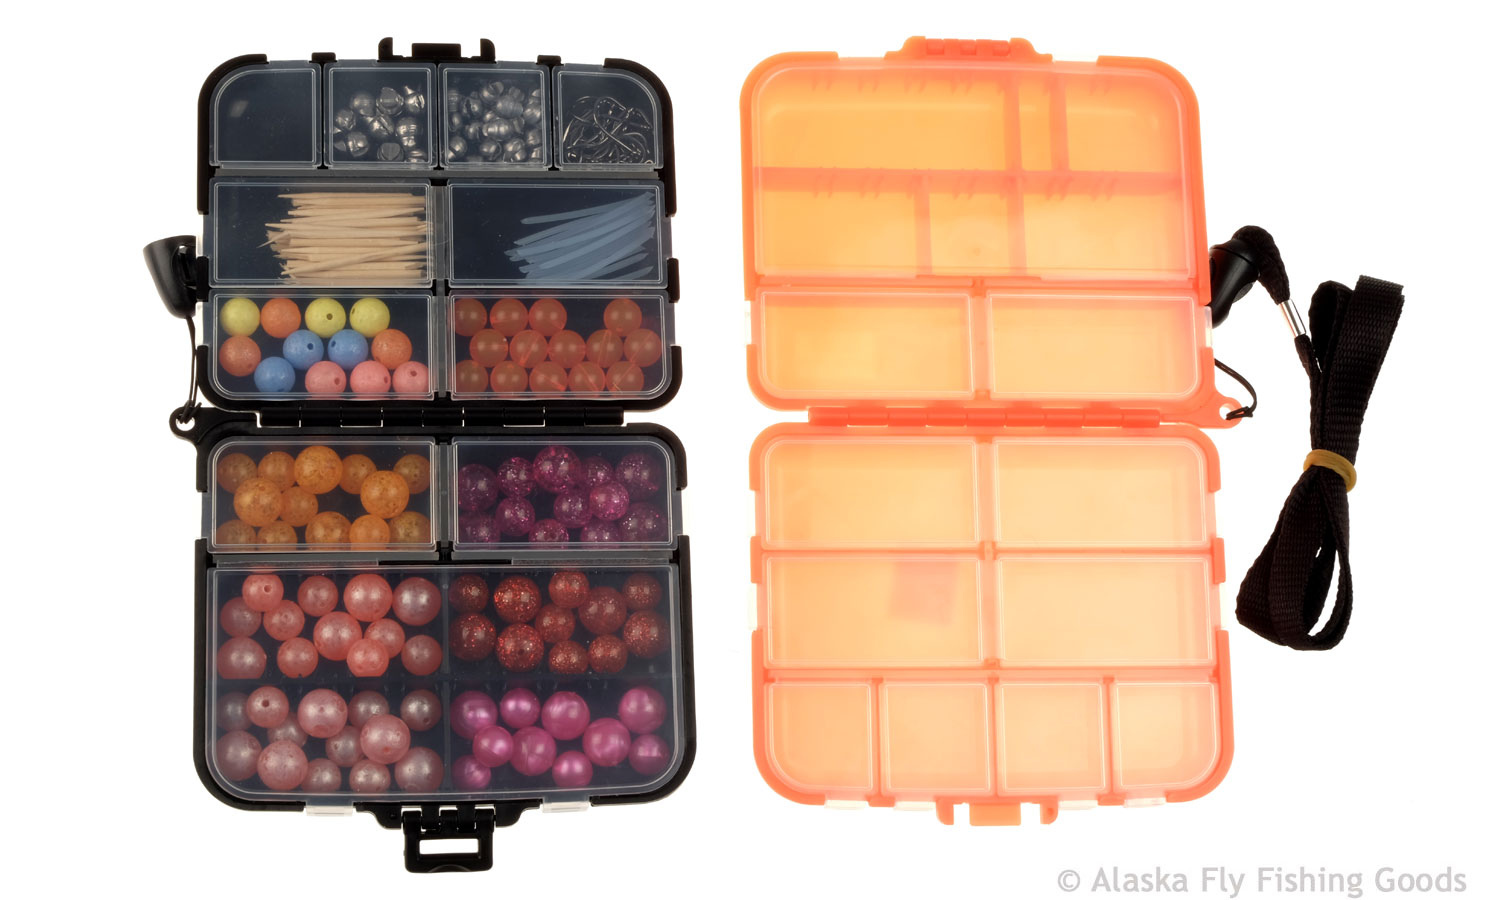 Deluxe Bead Box with 11 Compartments - Bead Hooks, Pegs and Accessories -  Alaska Fly Fishing Goods